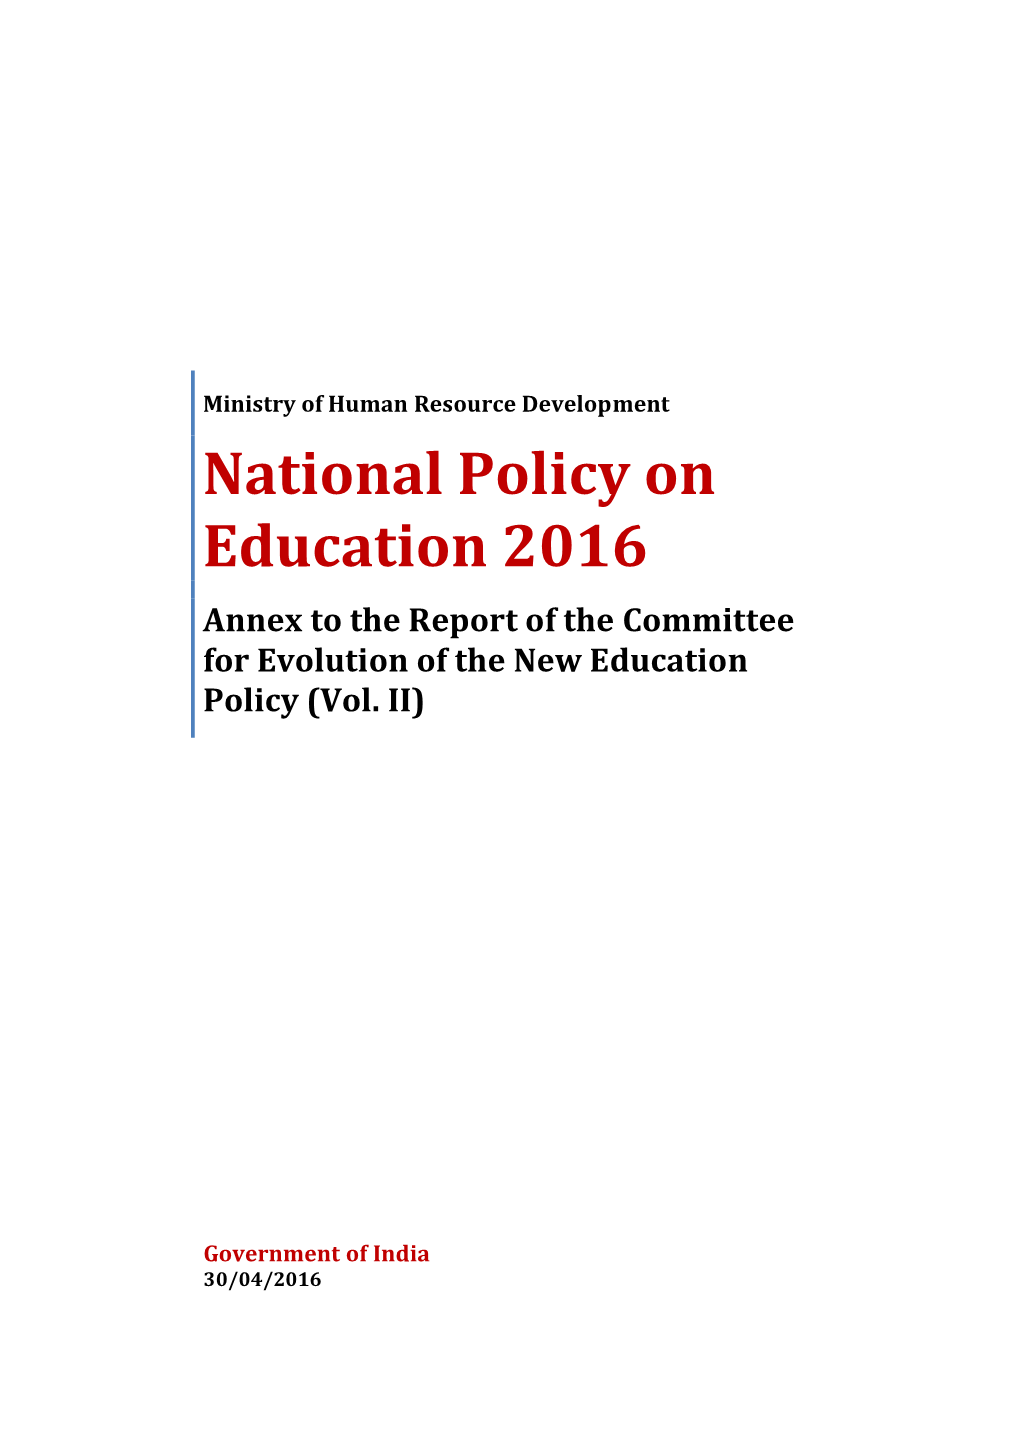 National Policy on Education 2016 Annex to the Report of the Committee for Evolution of the New Education Policy (Vol